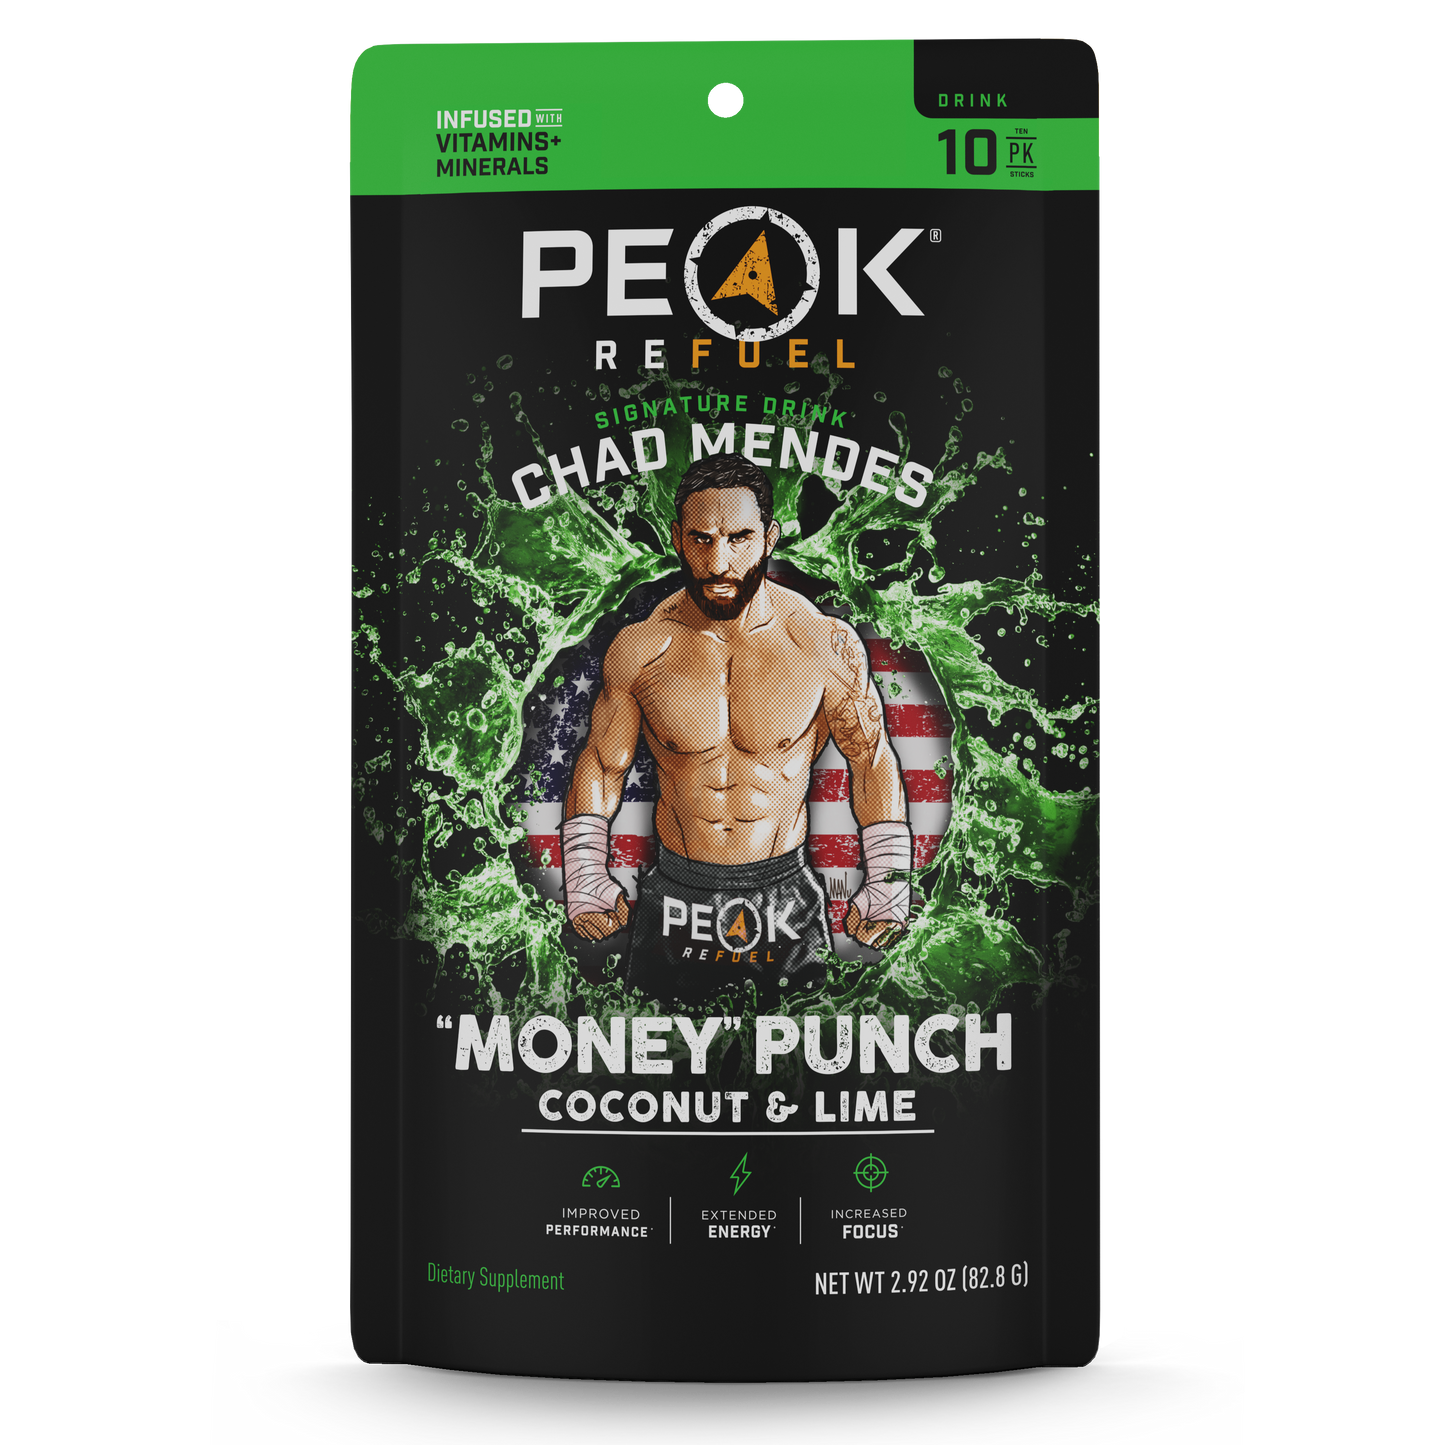 "Money" Punch Coconut & Lime Energy Drink by Peak Refuel